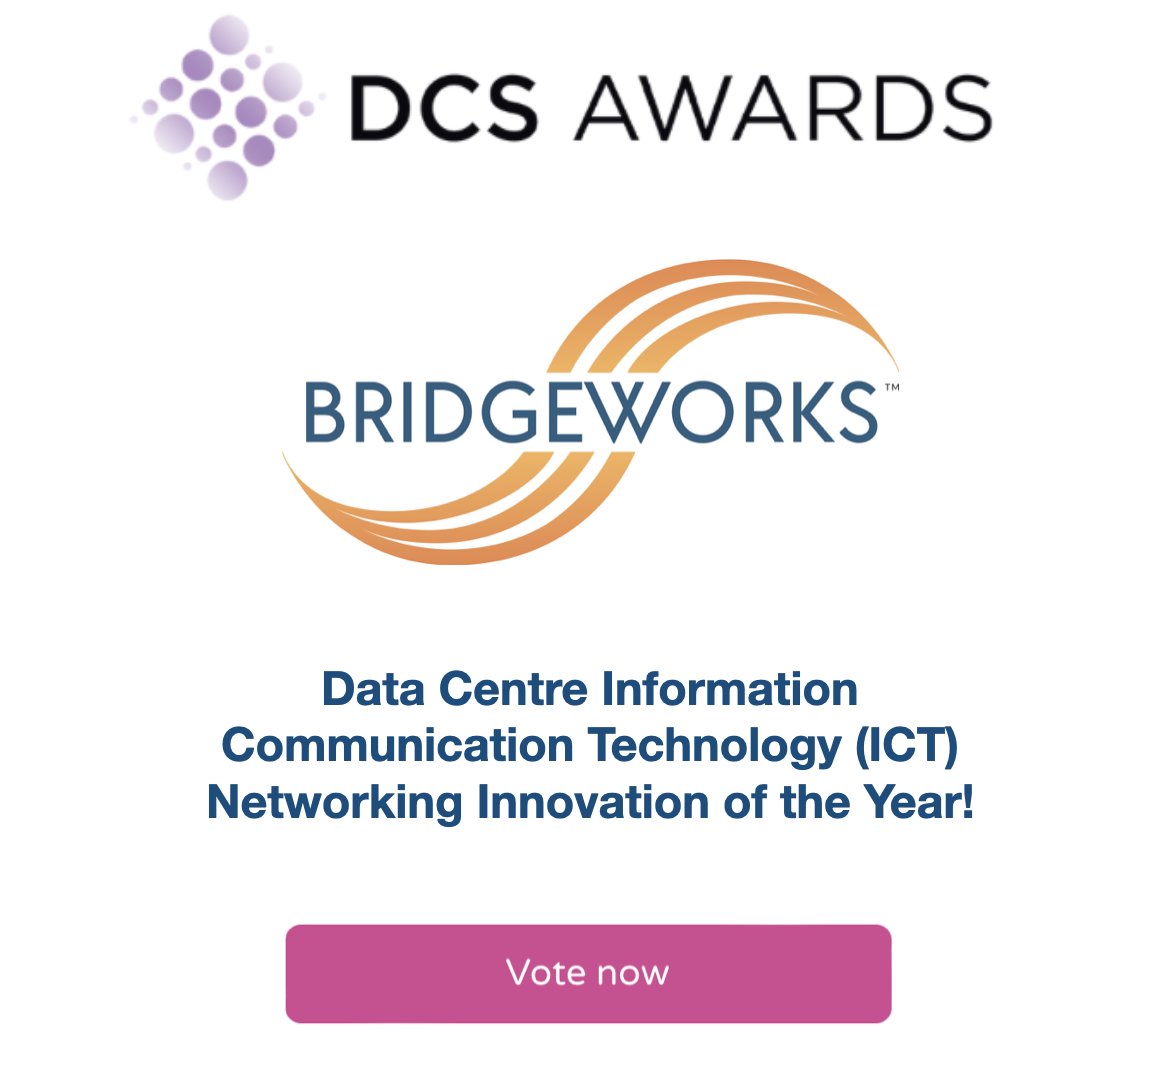 RT @BridgeworksLtd: VOTE NOW for Bridgeworks in the prestigious @DCSAwards! We are nominated for #DataCentre #ICT Networking Innovation of the year! dcsawards.com/vote #WANAcceleration #WAN #Storage #DataStorage #Latency #AI #DCSAwards #DataMana…